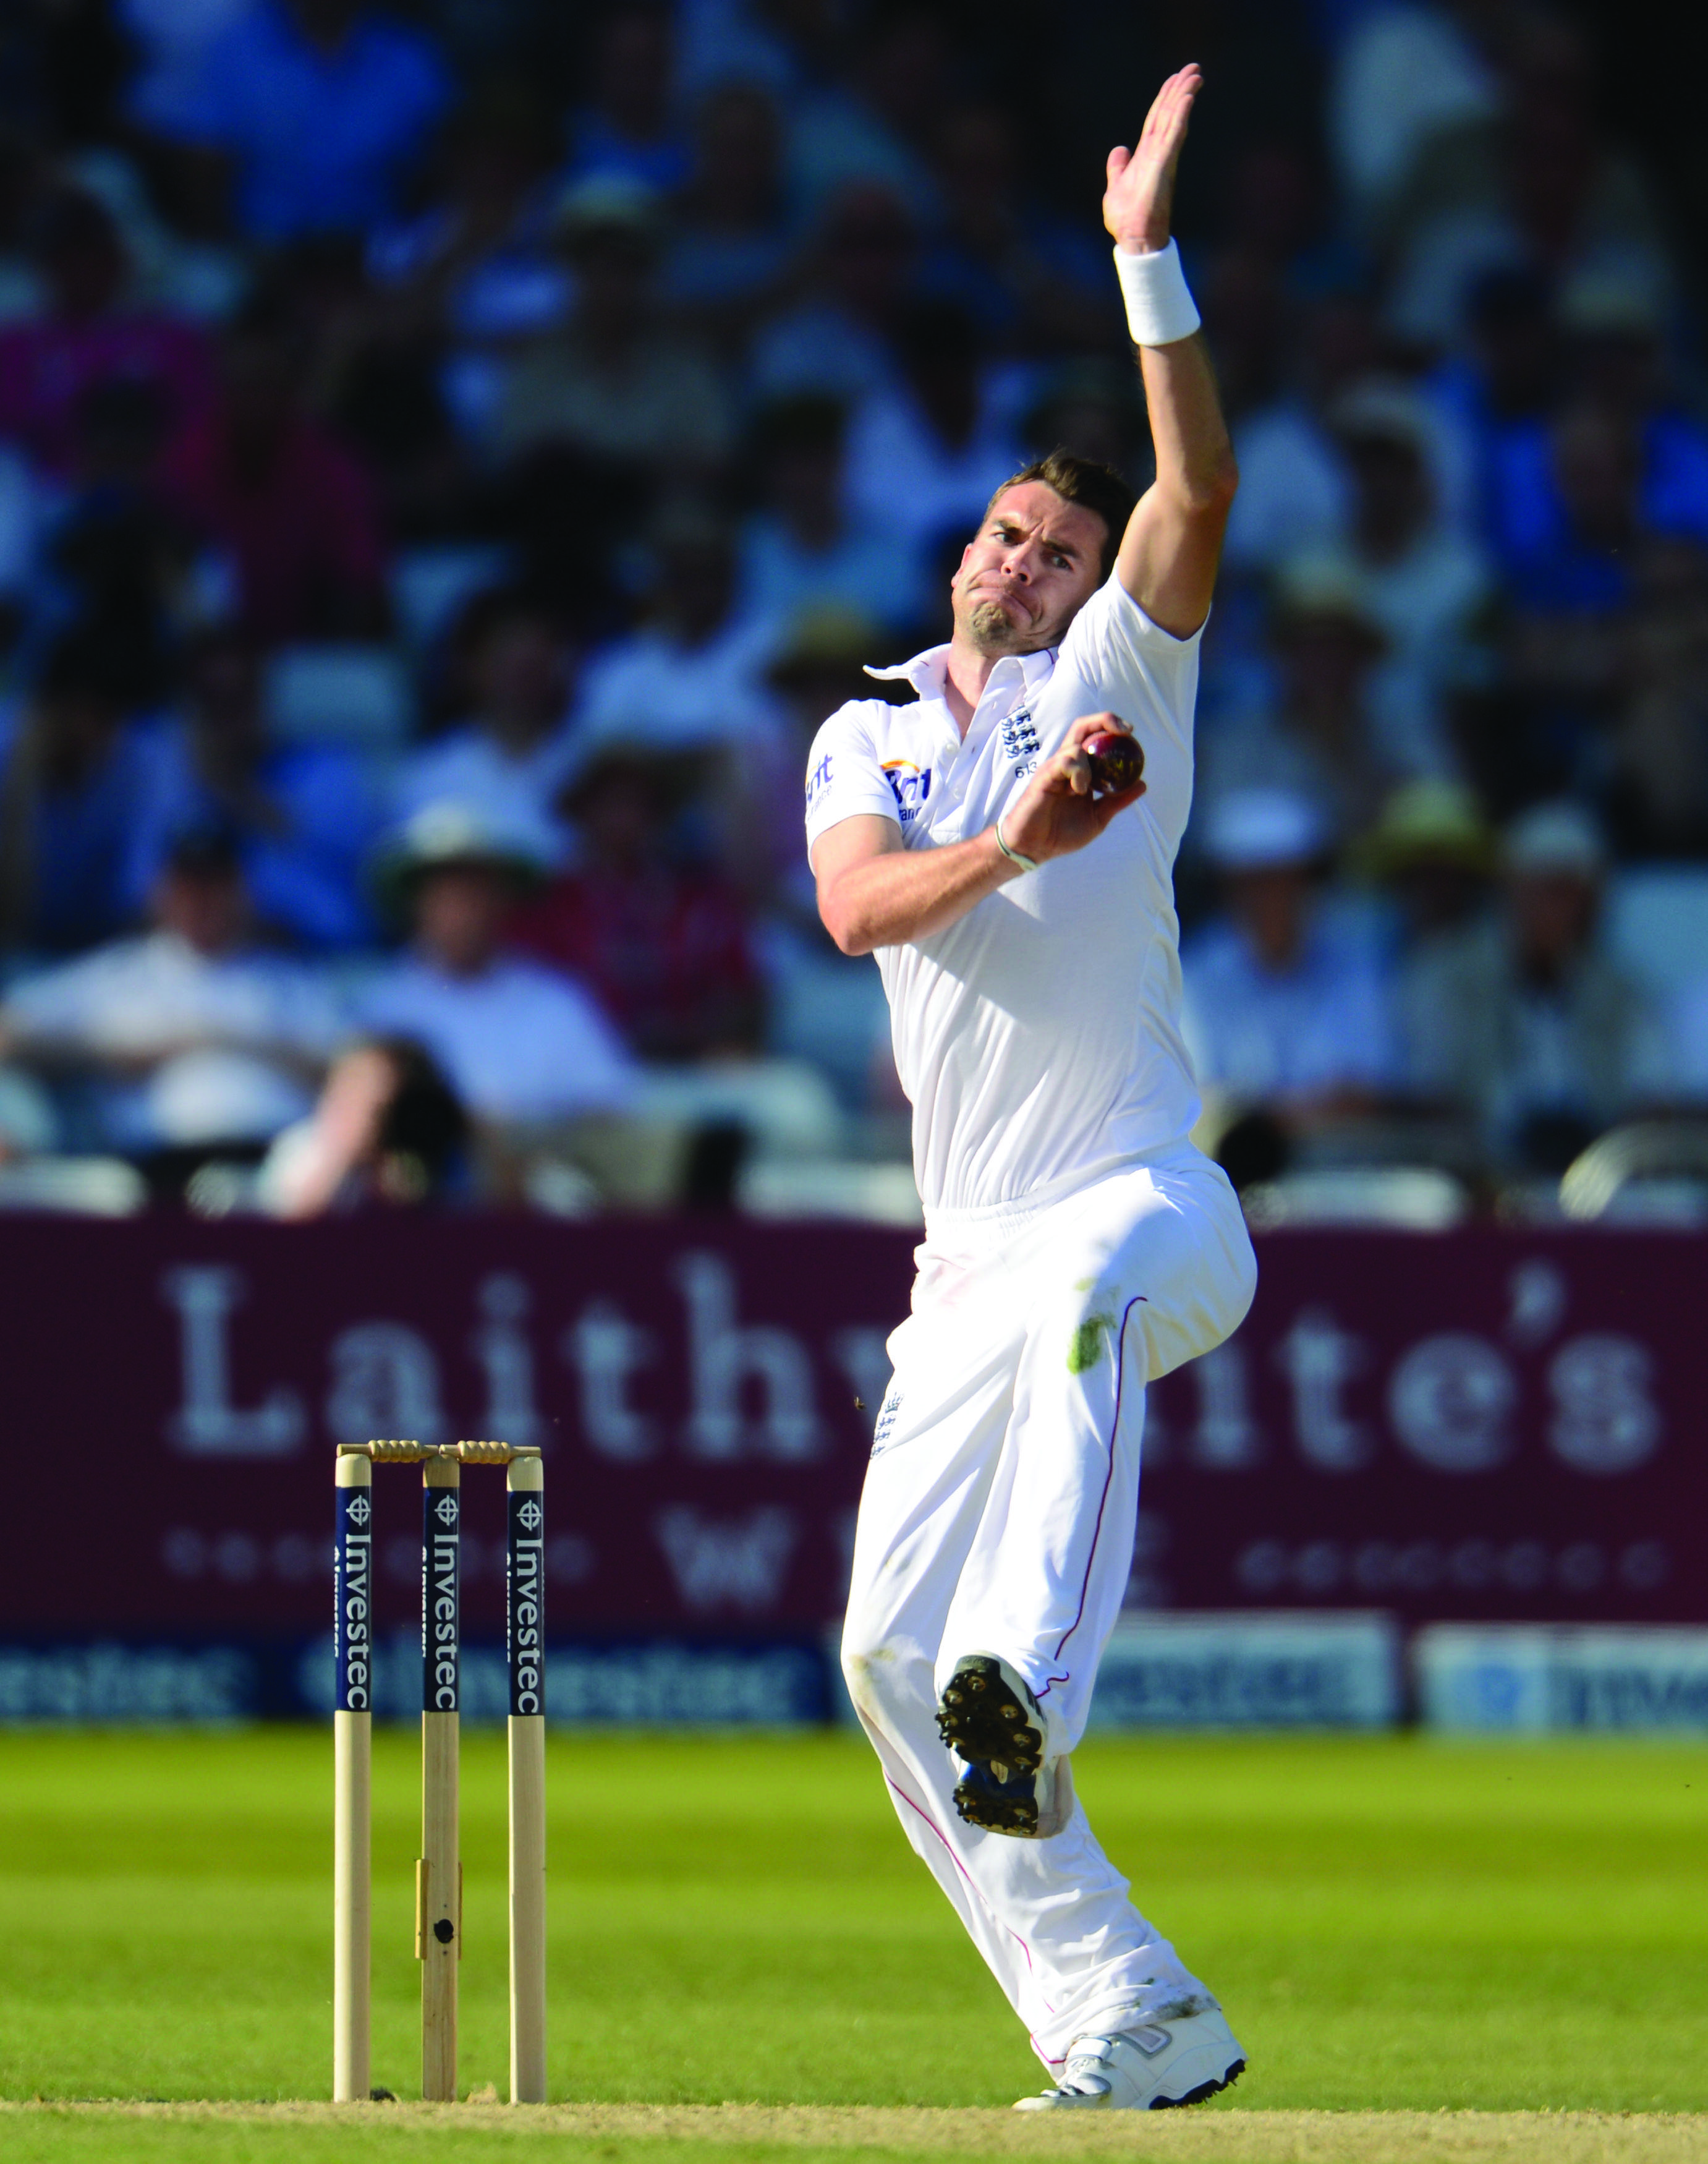 Ashes 2013 Images | Cricket Posters | James Anderson